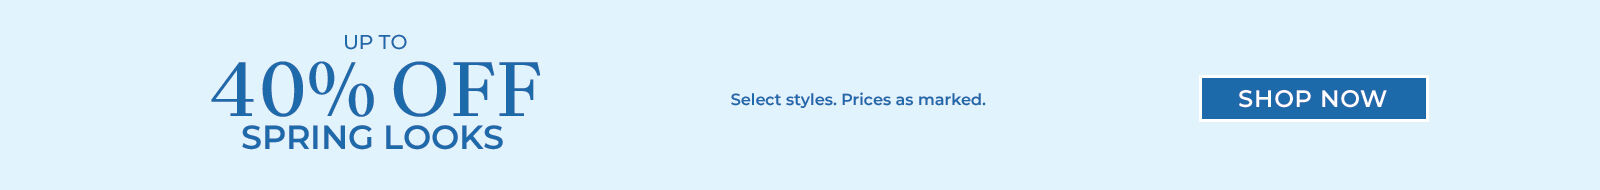 up to 40% off spring looks select styles | prices as marked. shop now